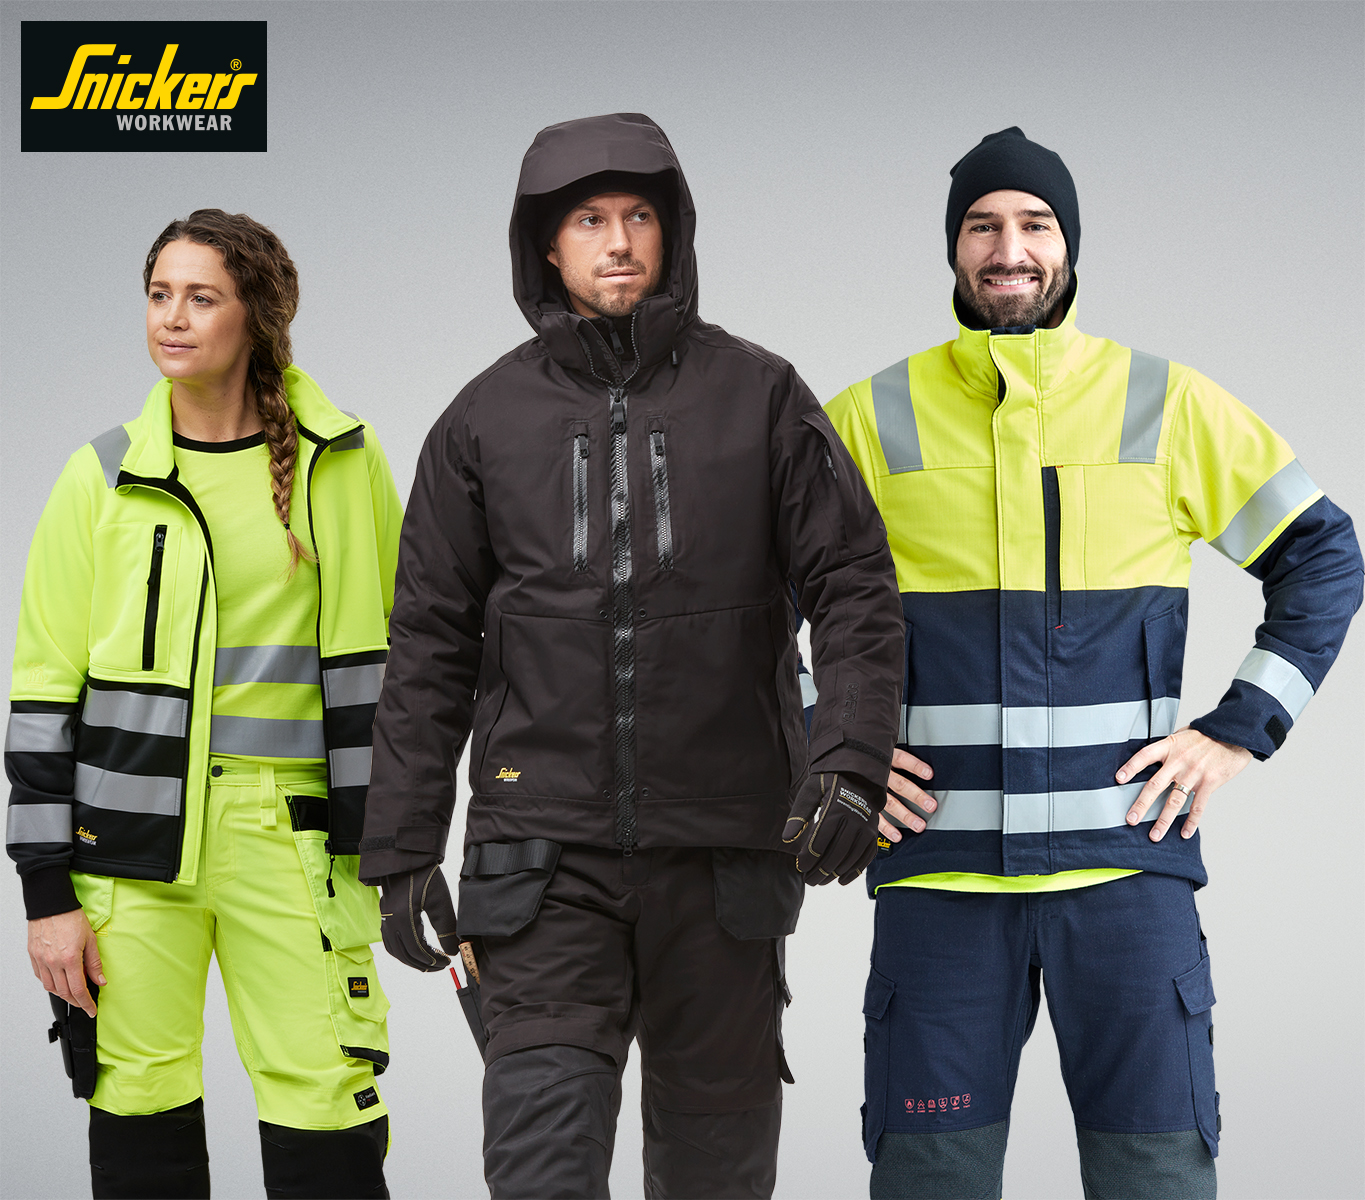 SNICKERS Workwear Review - Top Gear for Builders 